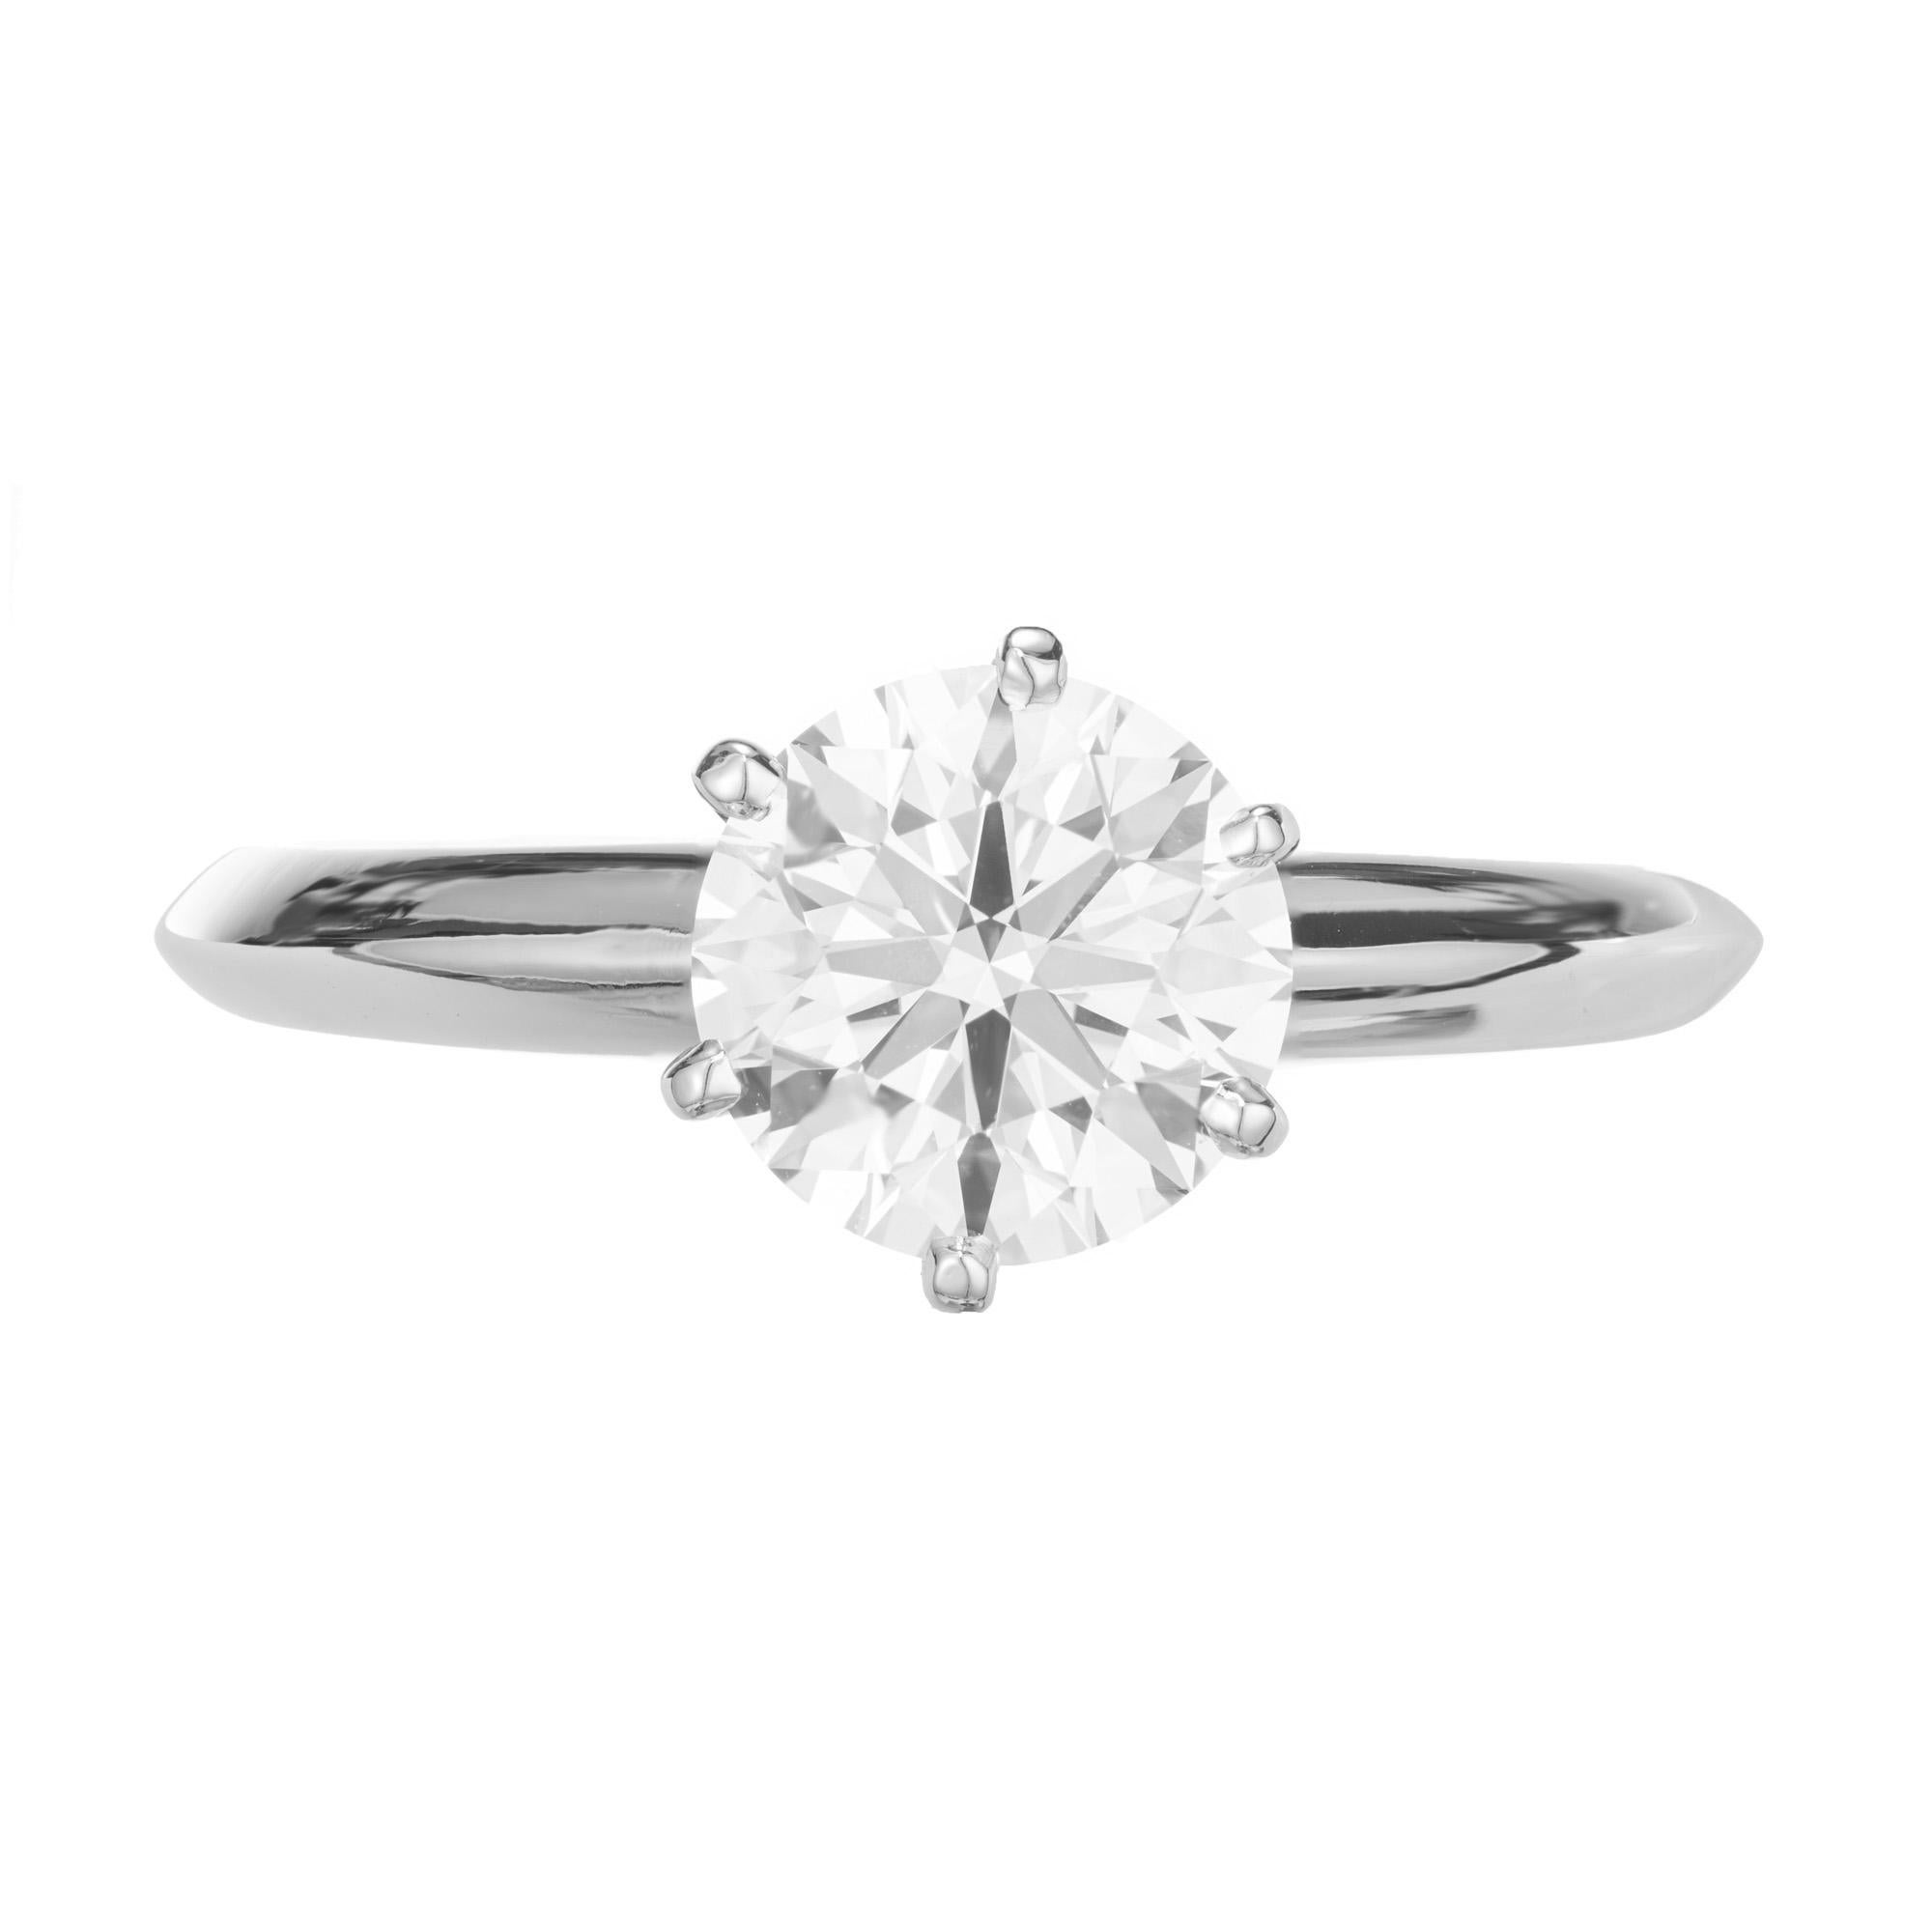 1990's Tiffany & Co diamond solitaire engagement ring. GIA certified round brilliant cut center diamond in a solid platinum setting. Certified as D color and VVS2. In the 1990's time period, Tiffany used diamonds of this quality. Tiffany introduced